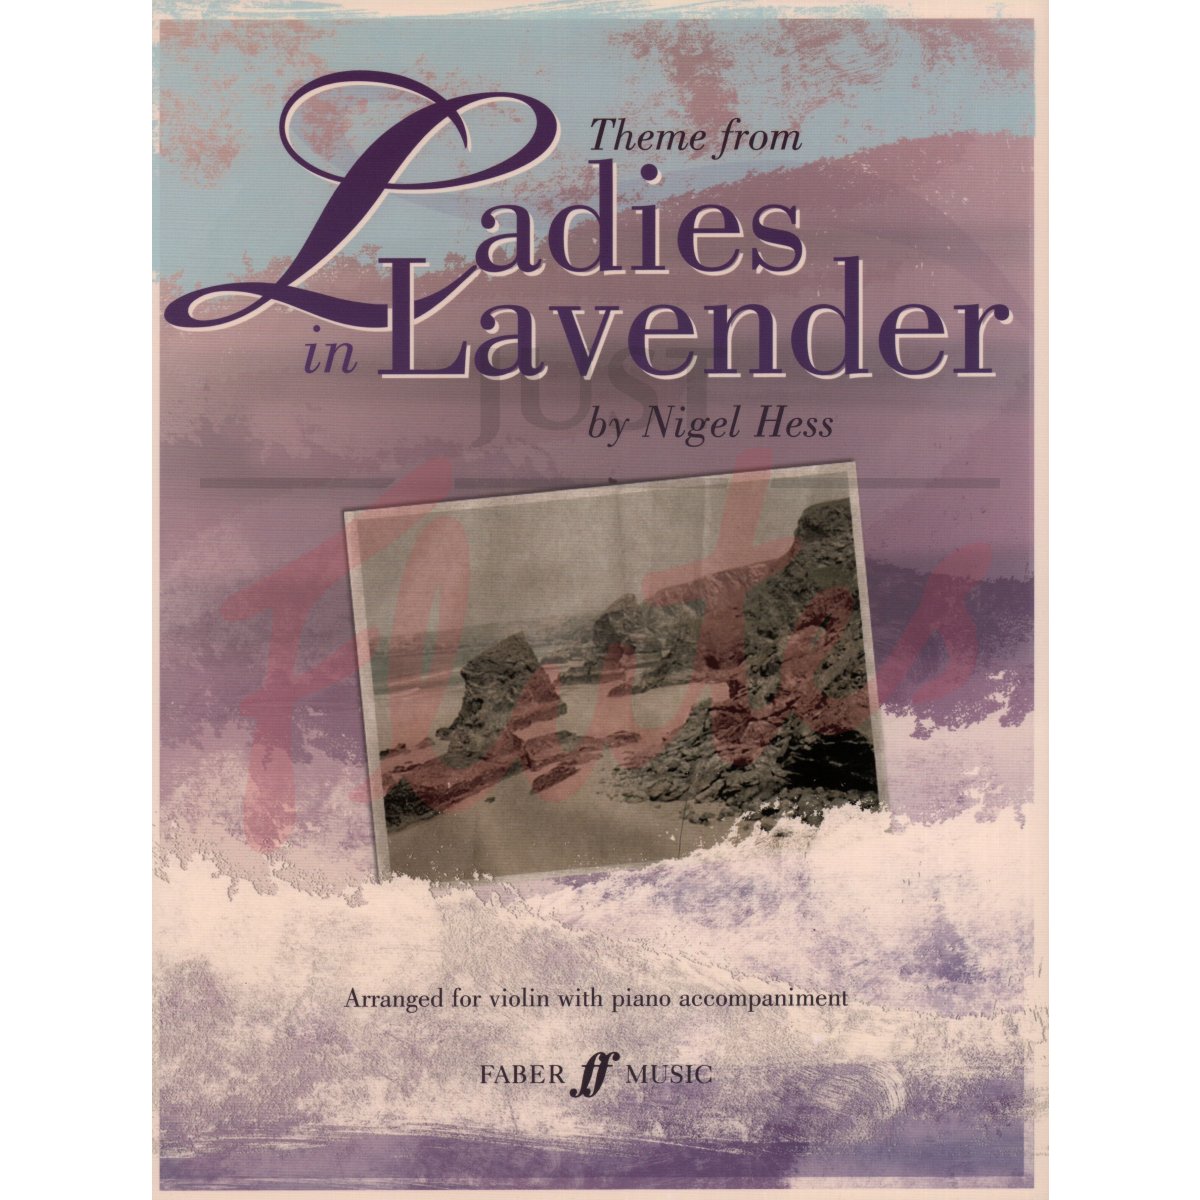 Theme from Ladies in Lavender for Violin and Piano